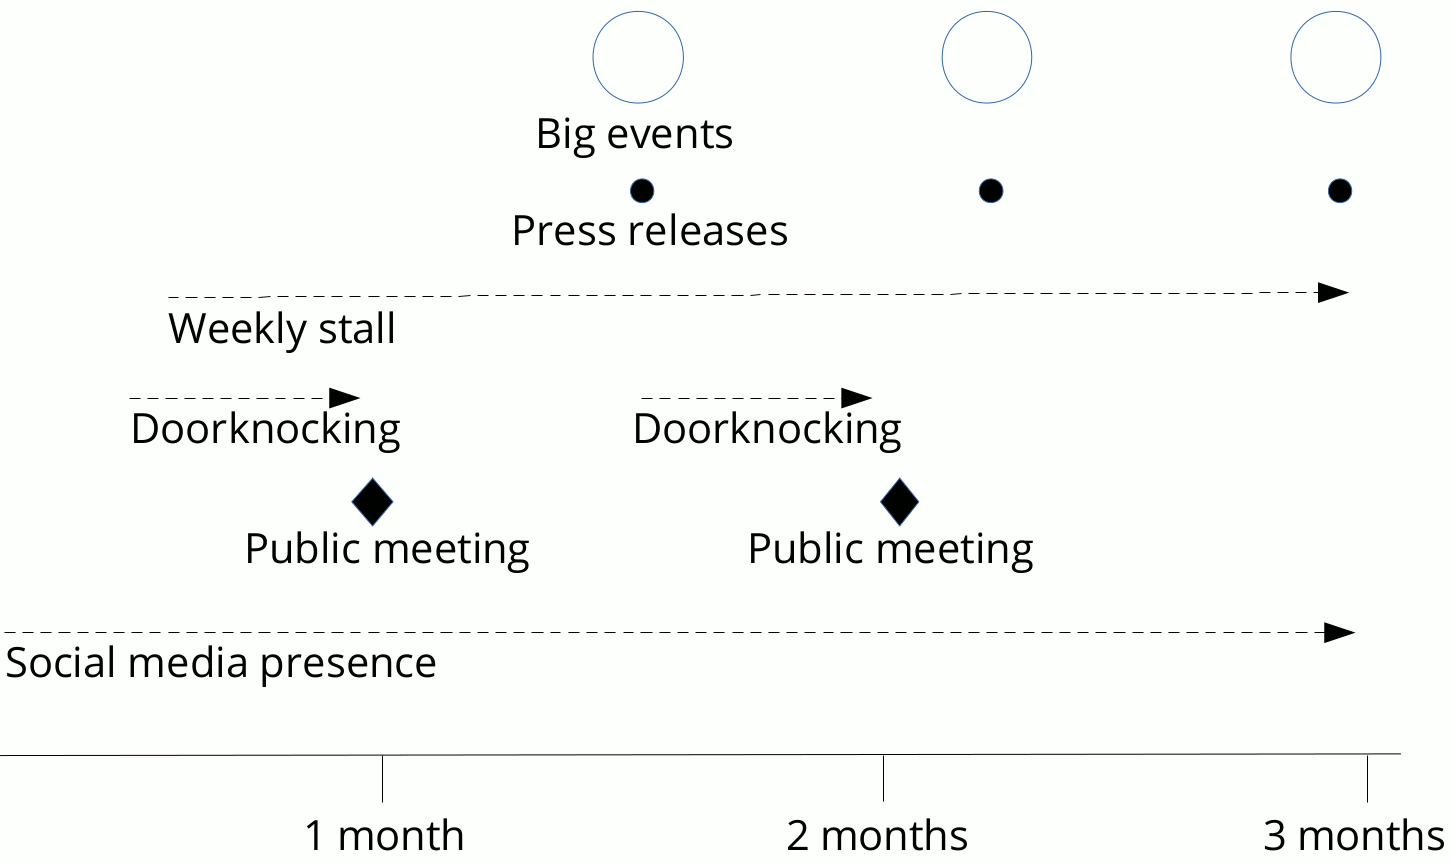 3 month timeline, showing 3 big events and press releases, with weekly stalls and social media presence ongoing. Doorknocking happens before public meetings.